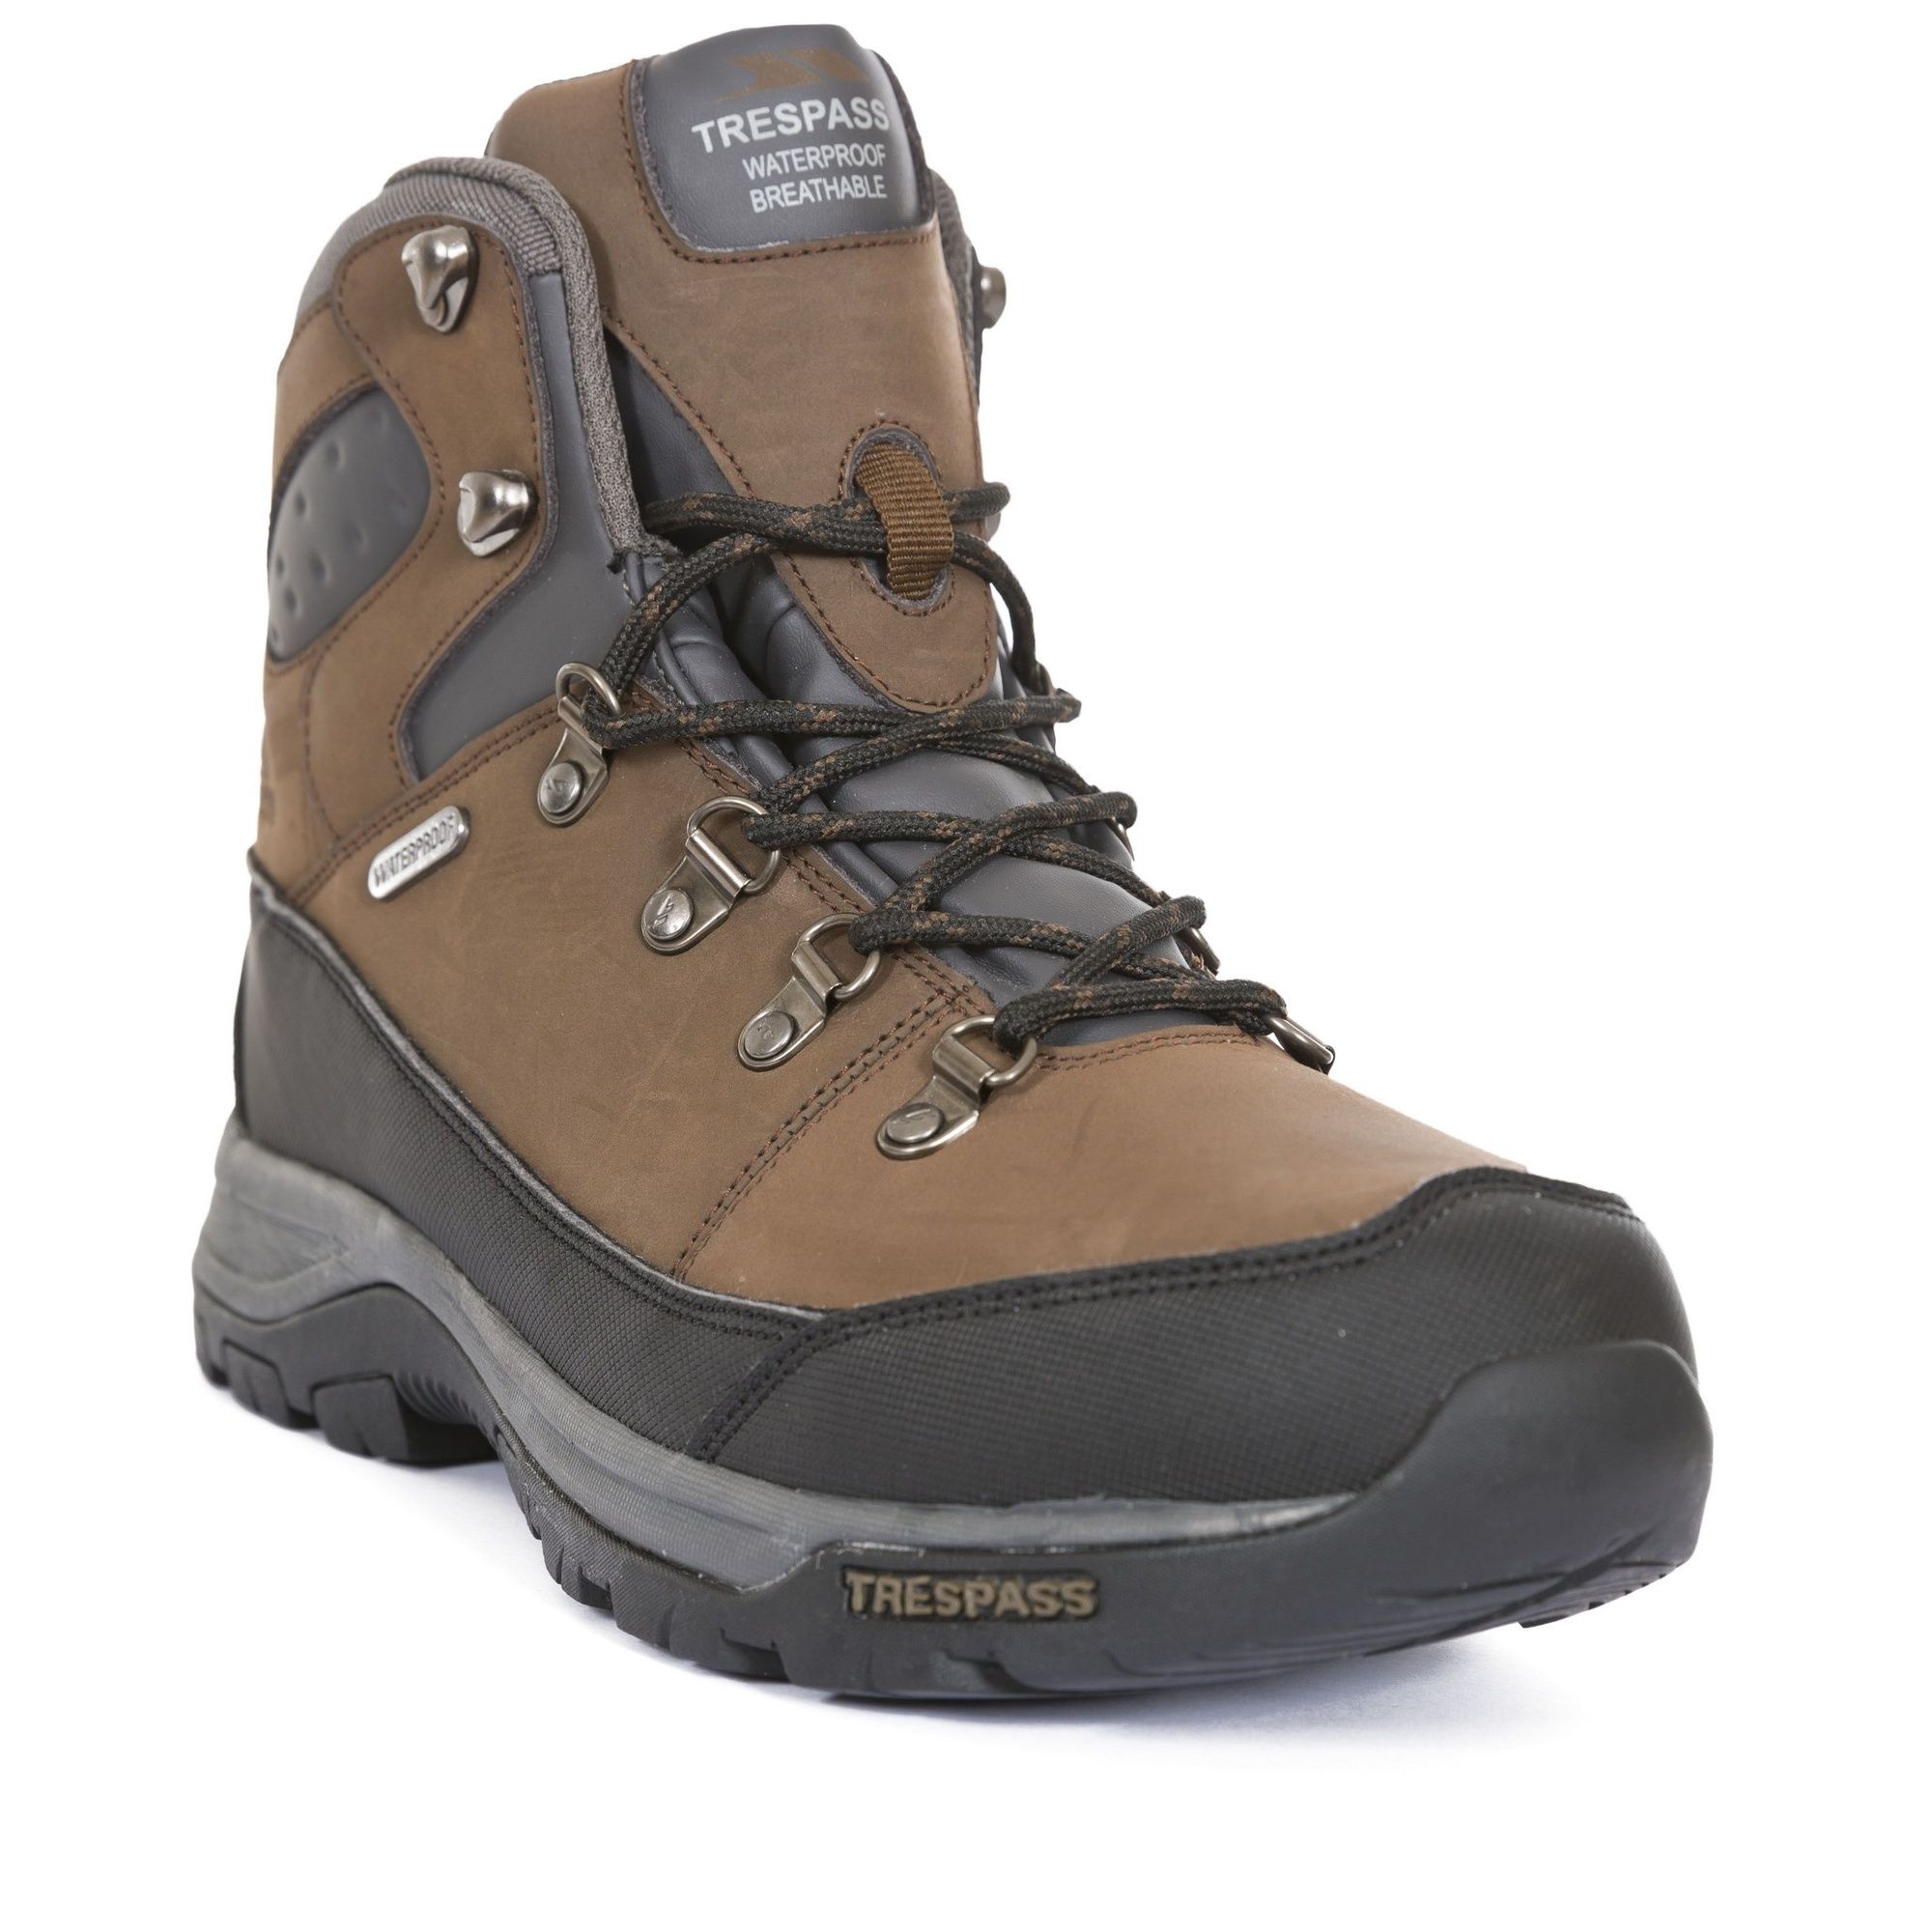 Mid cut hiking boot. Waterproof and breathable membrane. Gussetted tongue. Protective and durable all-round mudguard. Ankle supportive cushioned collar and tongue. Arch stabilising and supportive steel shank. Cushioned footbed. Upper: Leather/Action Leather/PU/Mesh, Lining: Mesh, Insole: EVA, Outsole: Moulded EVA/Rubber.